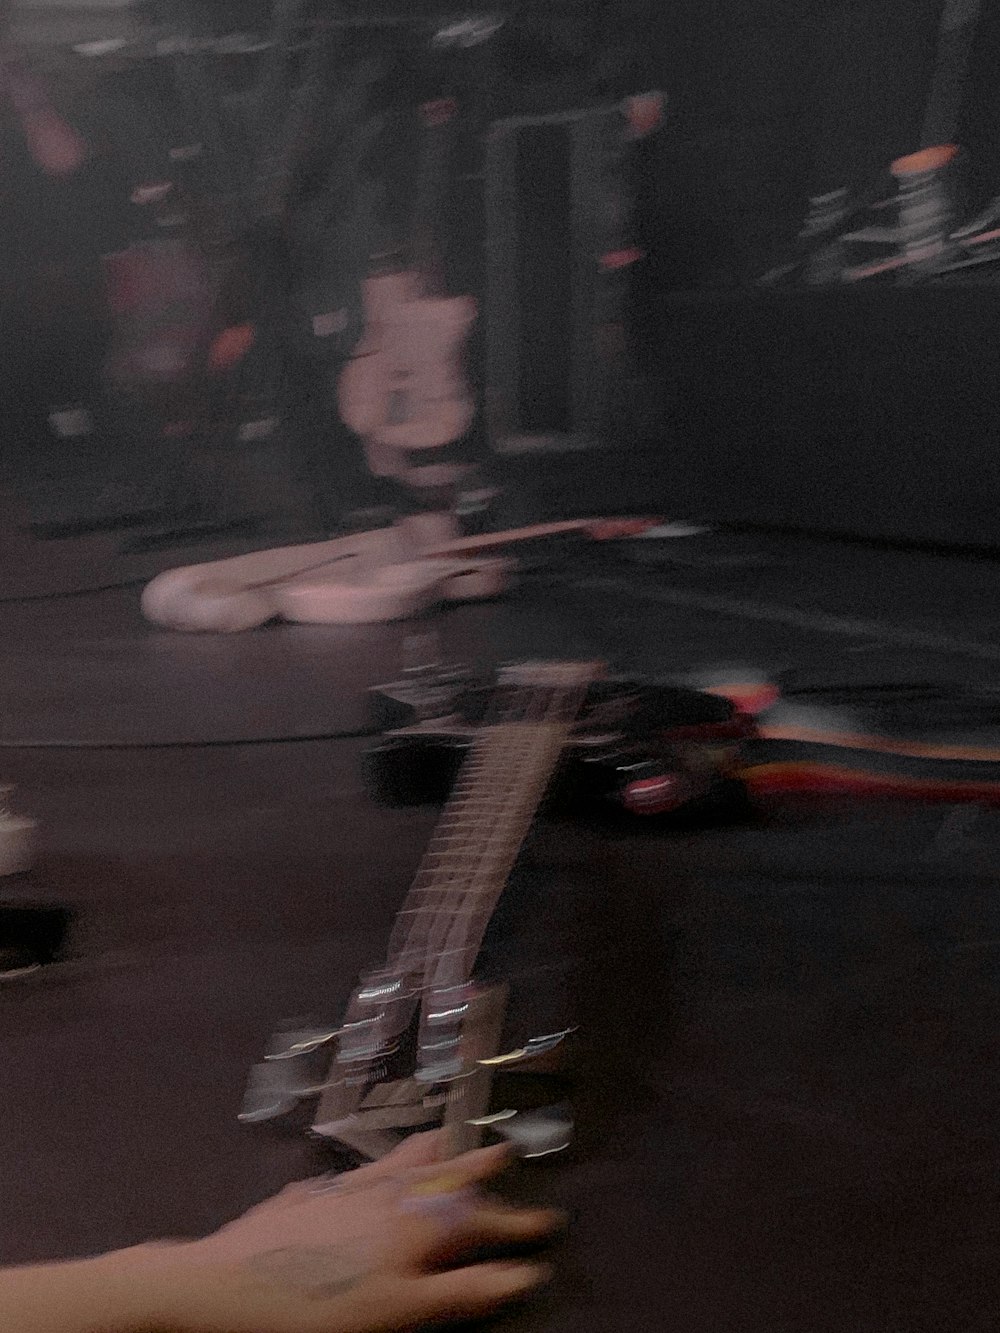 a person playing a guitar on a stage